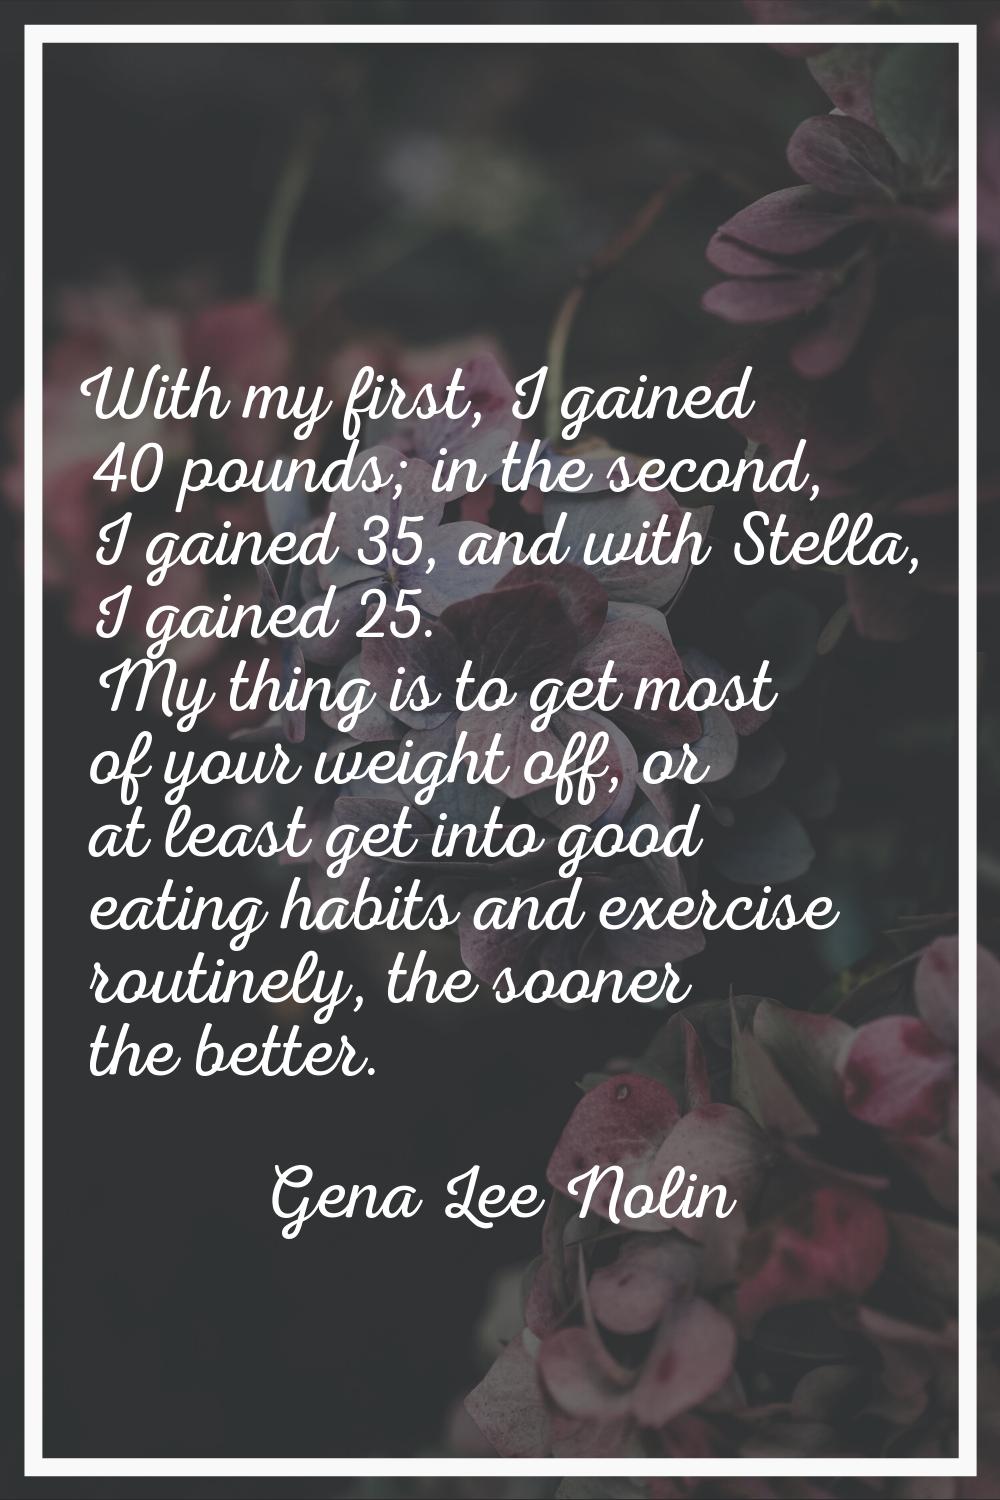 With my first, I gained 40 pounds; in the second, I gained 35, and with Stella, I gained 25. My thi